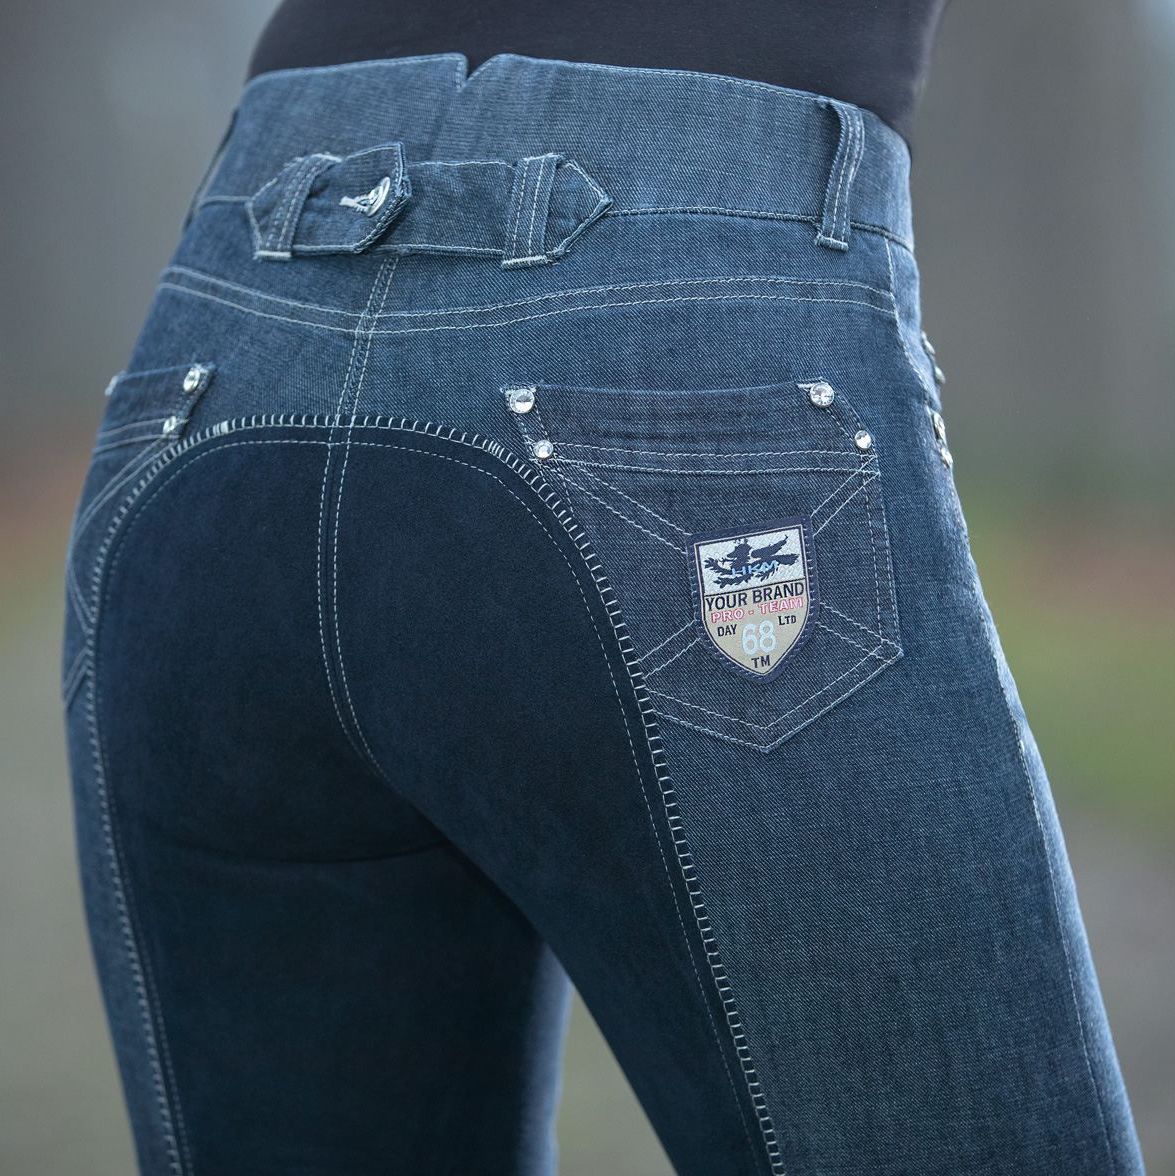 High waisted riding jeans with bell boot bottoms.